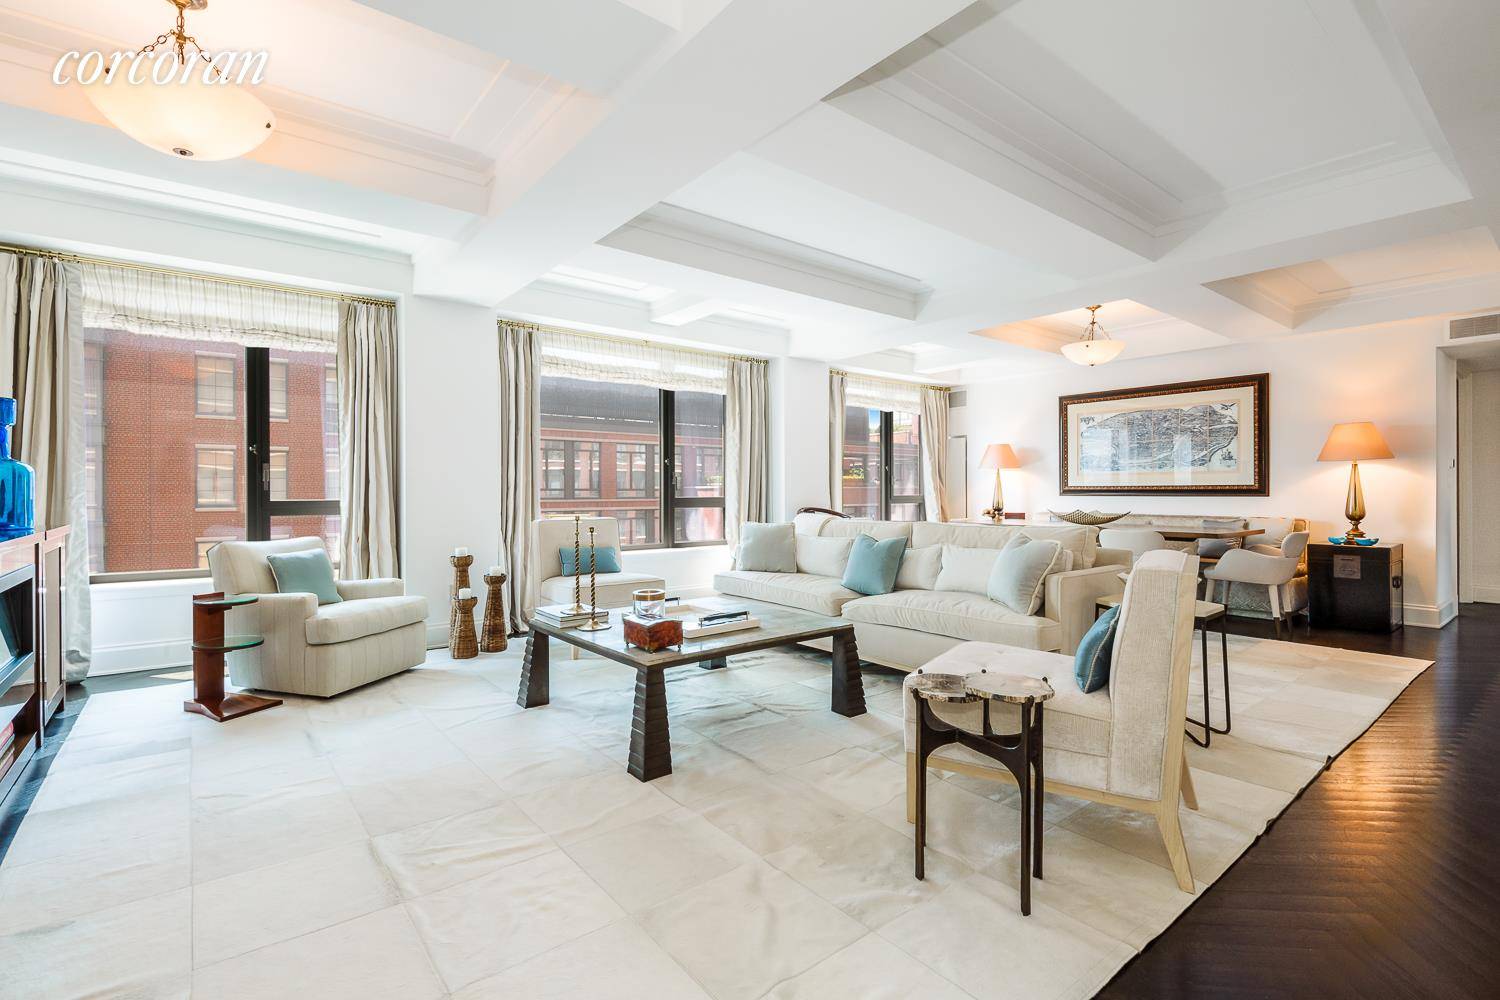 Situated mid block on one of the Village's prettiest tree lined townhouse blocks, west 12th street, this expansive and elegant interpretation of a classic prewar two bedroom residence spans 2, ...